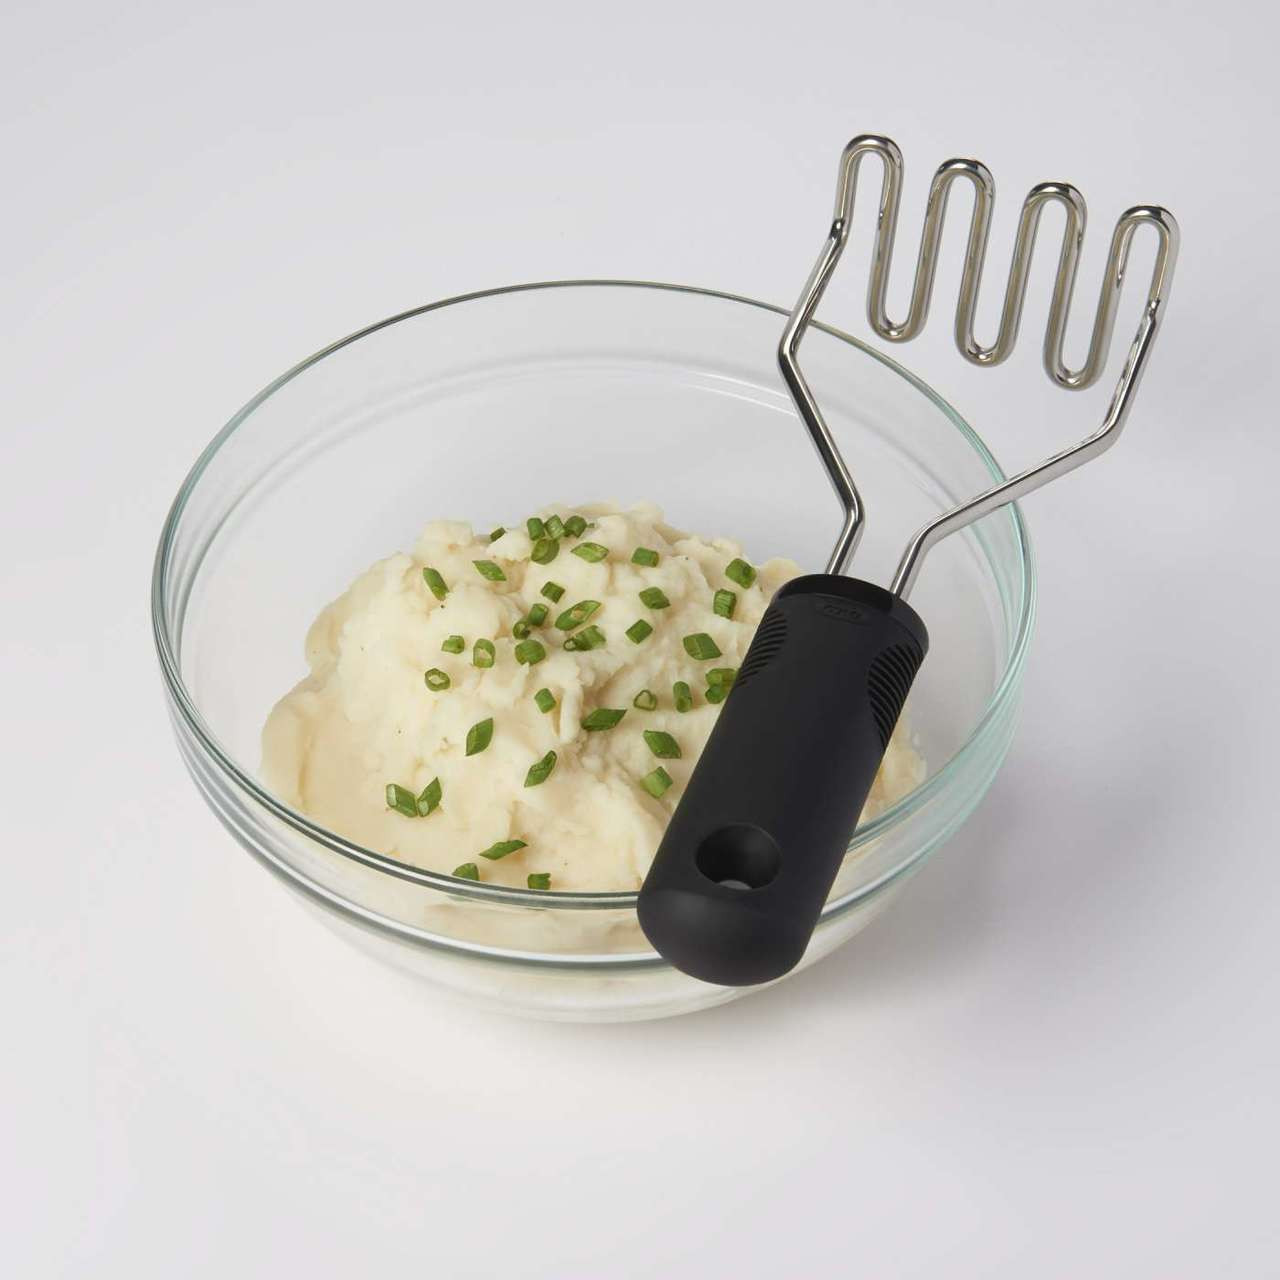  OXO Good Grips Stainless Steel Potato Ricer: Home